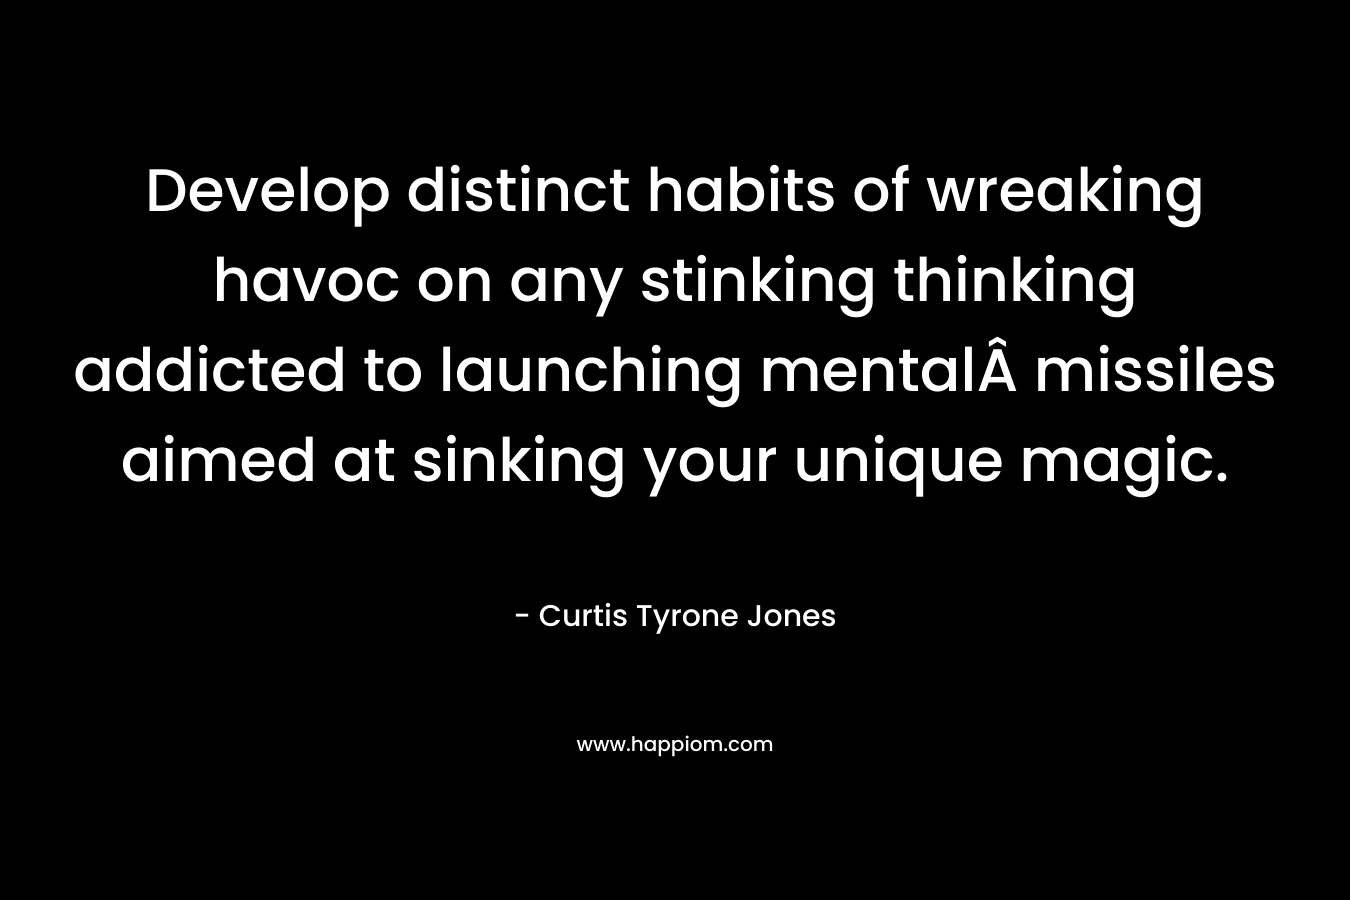 Develop distinct habits of wreaking havoc on any stinking thinking addicted to launching mentalÂ missiles aimed at sinking your unique magic.